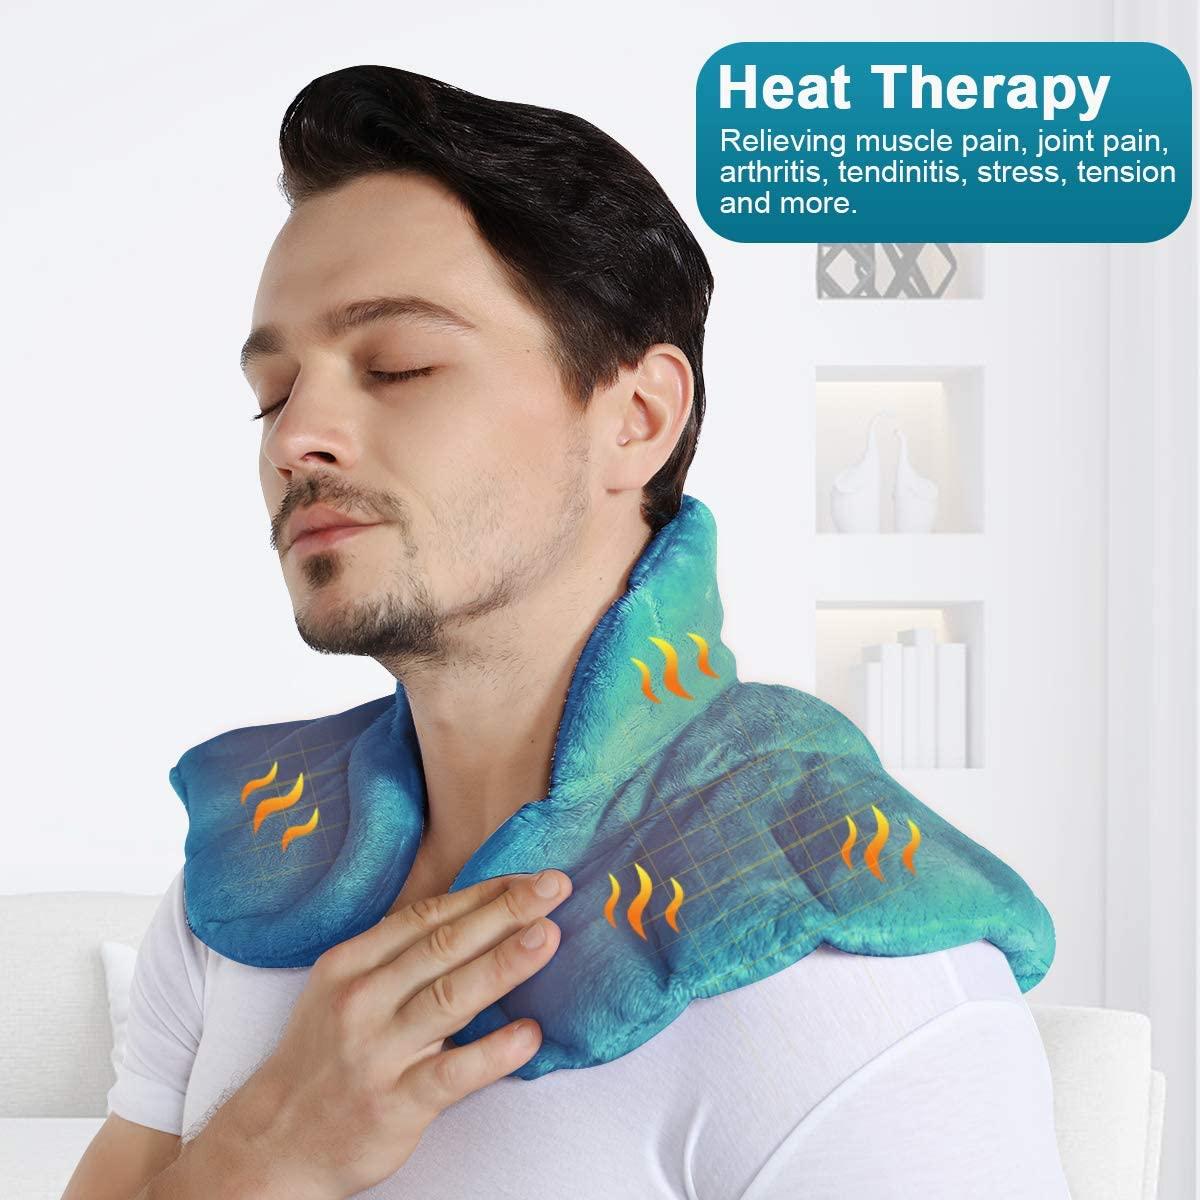 REVIX Heated Neck Wrap Microwave Heating Pad for Neck and Shoulders ...